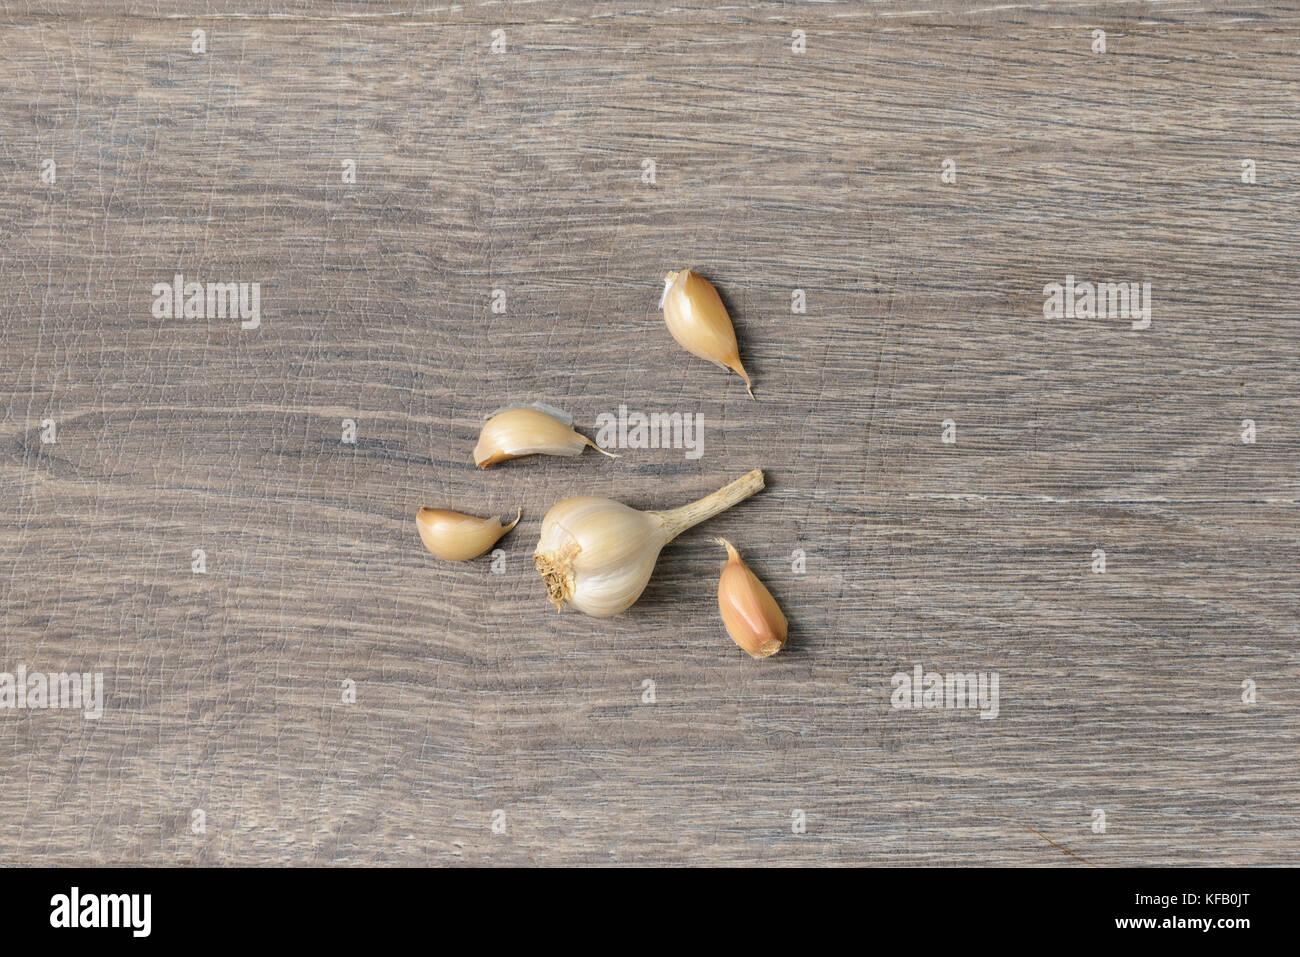 Garlic scattered on wooden table Stock Photo